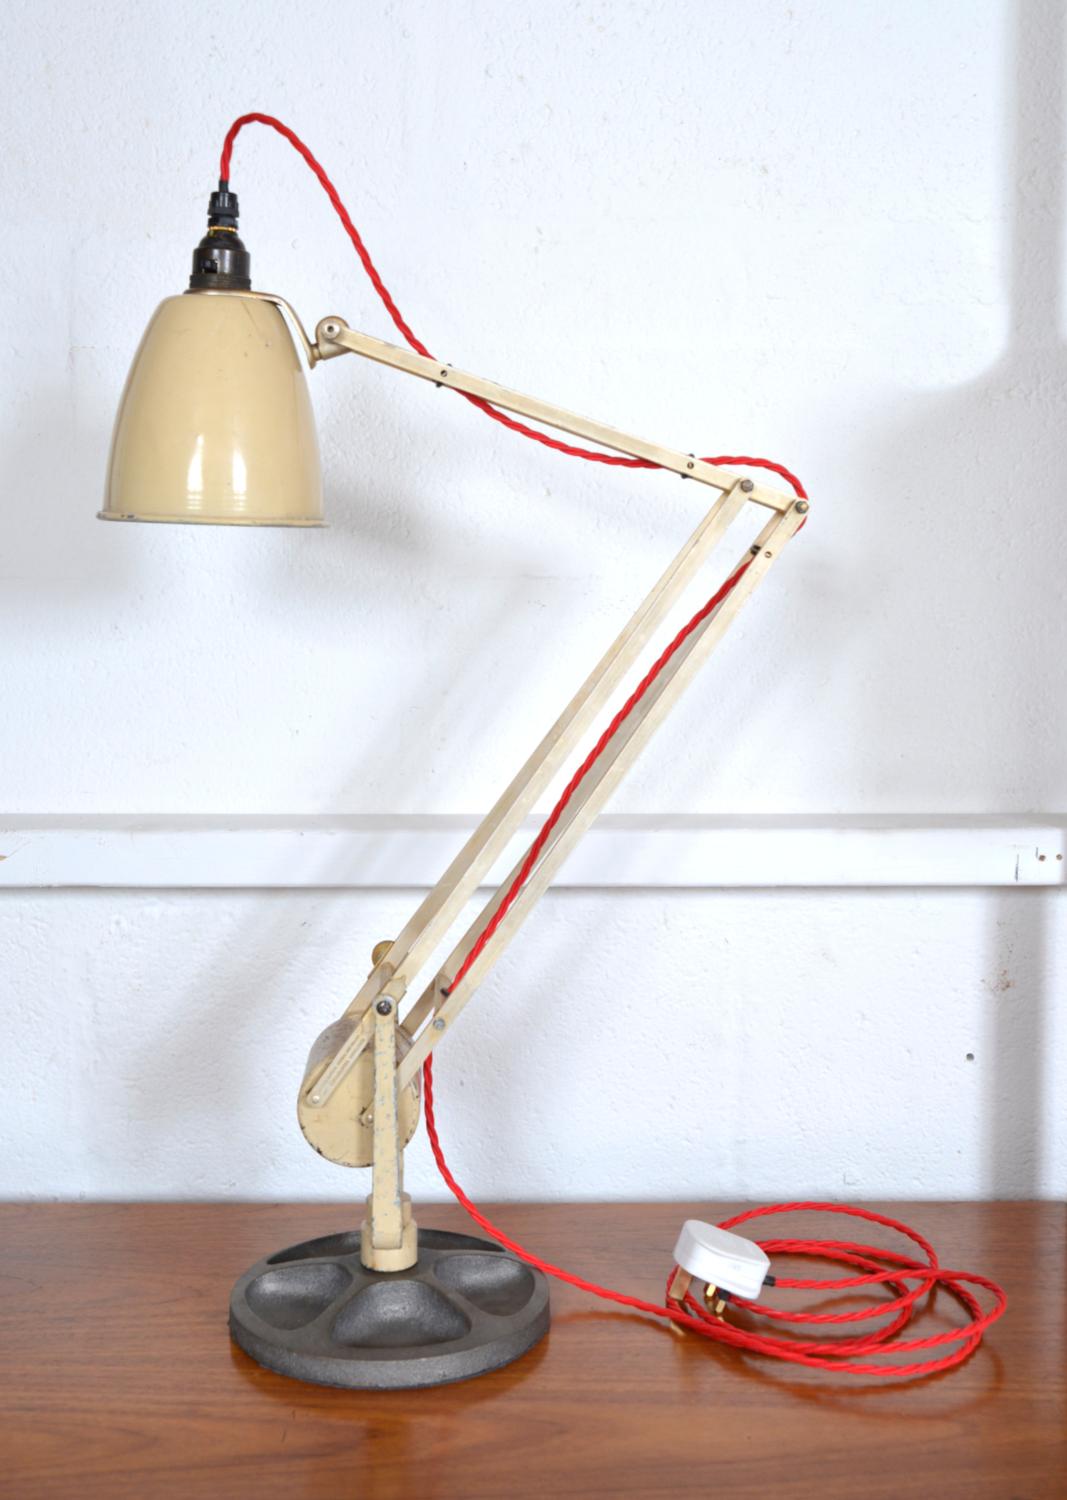 A 1960s British made counterpoised 'Roller' task lamp by Hadrill & Horstmann, which would have been originally bolted to a bench as a task lamp, whereas today it sits on a heavy cast weight, perfect for a desk lamp. The counterbalance operation is